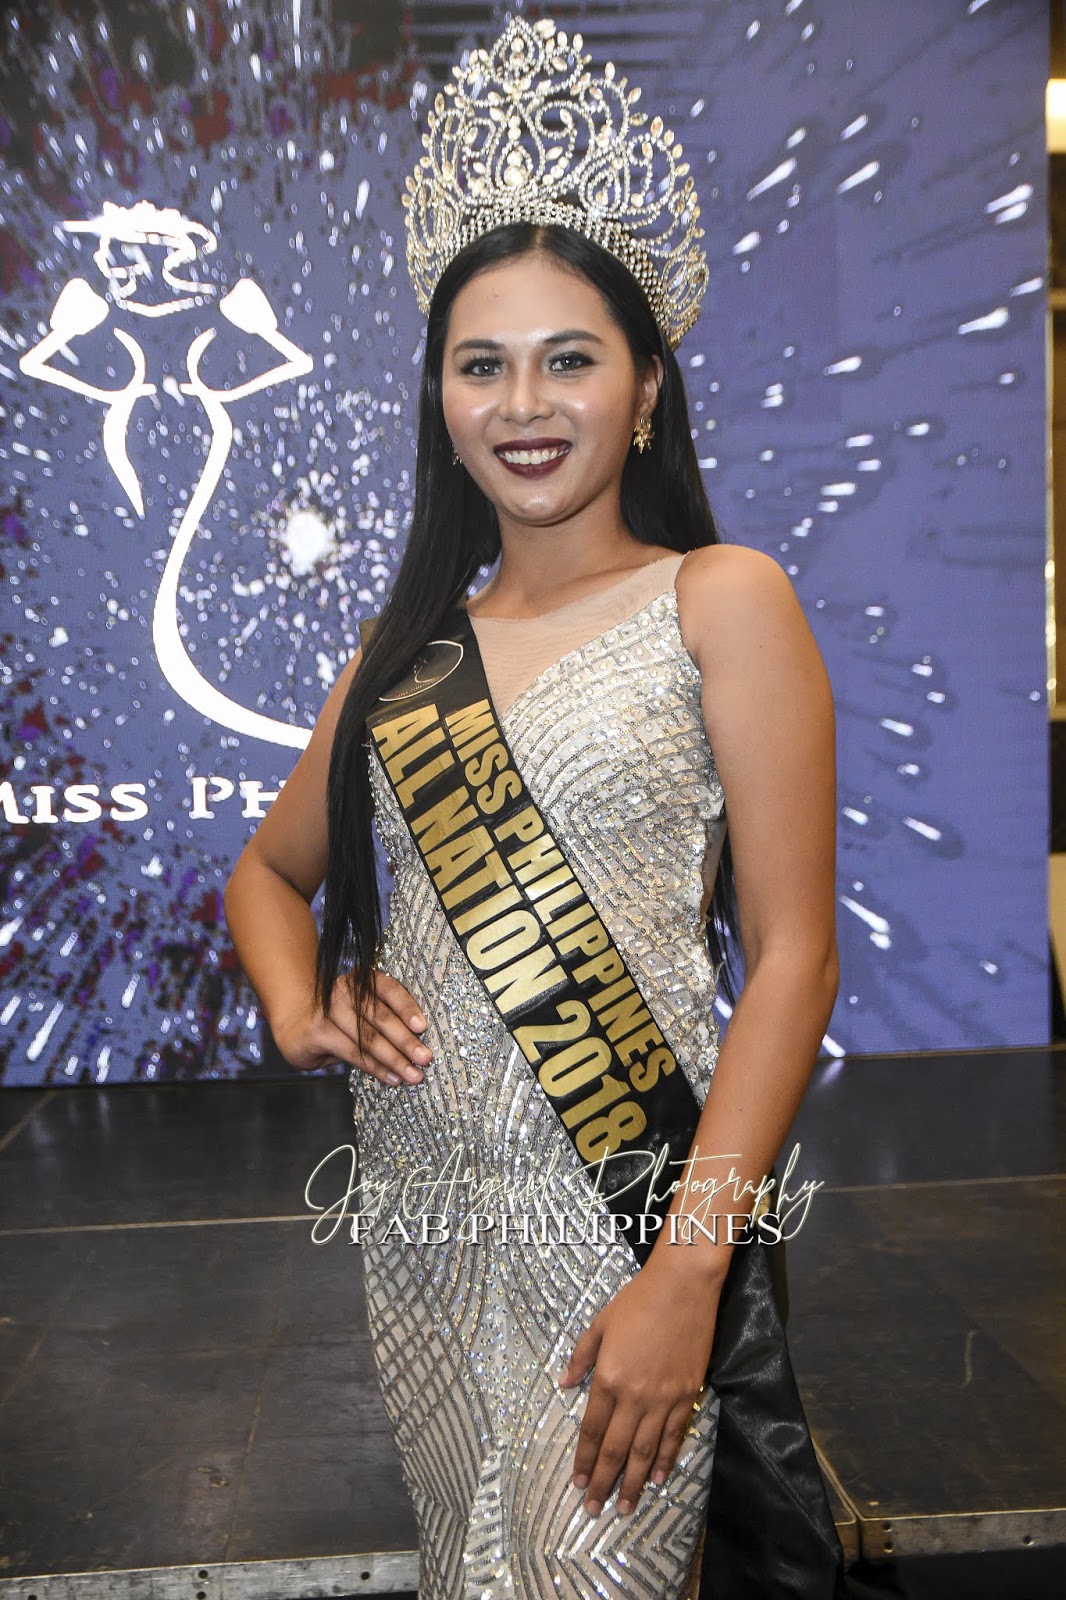 Fab Philippines: MISS PHILIPPINES 2019 PAGEANT LAUNCHED